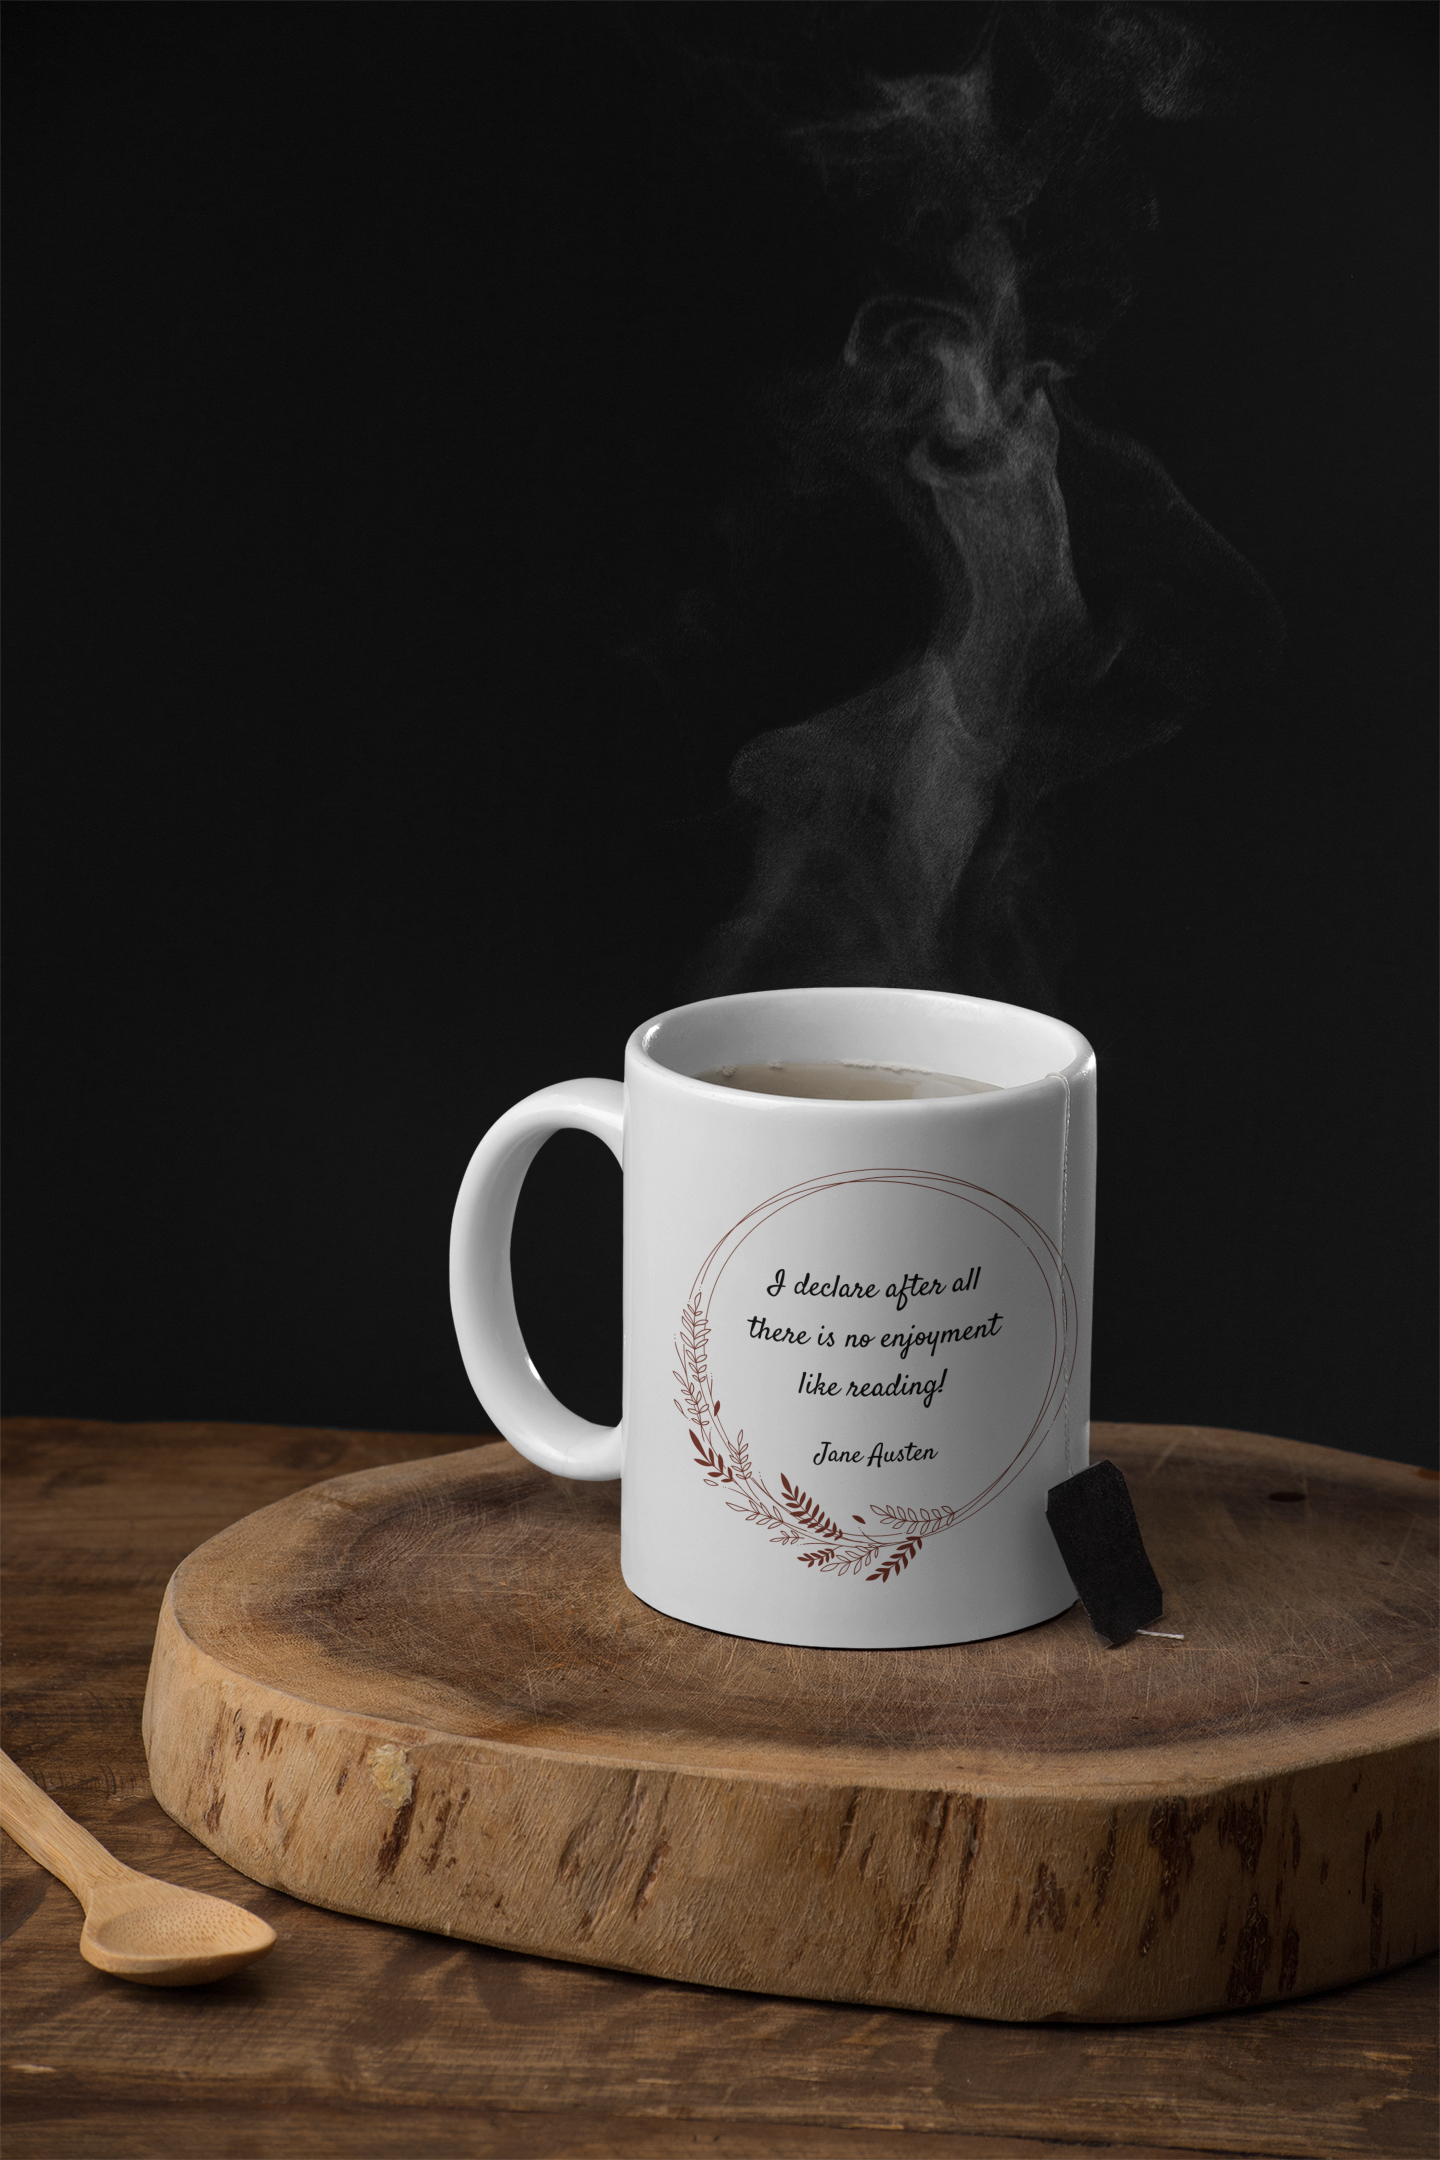 "I declare after all  there is no enjoyment  like reading" Mug